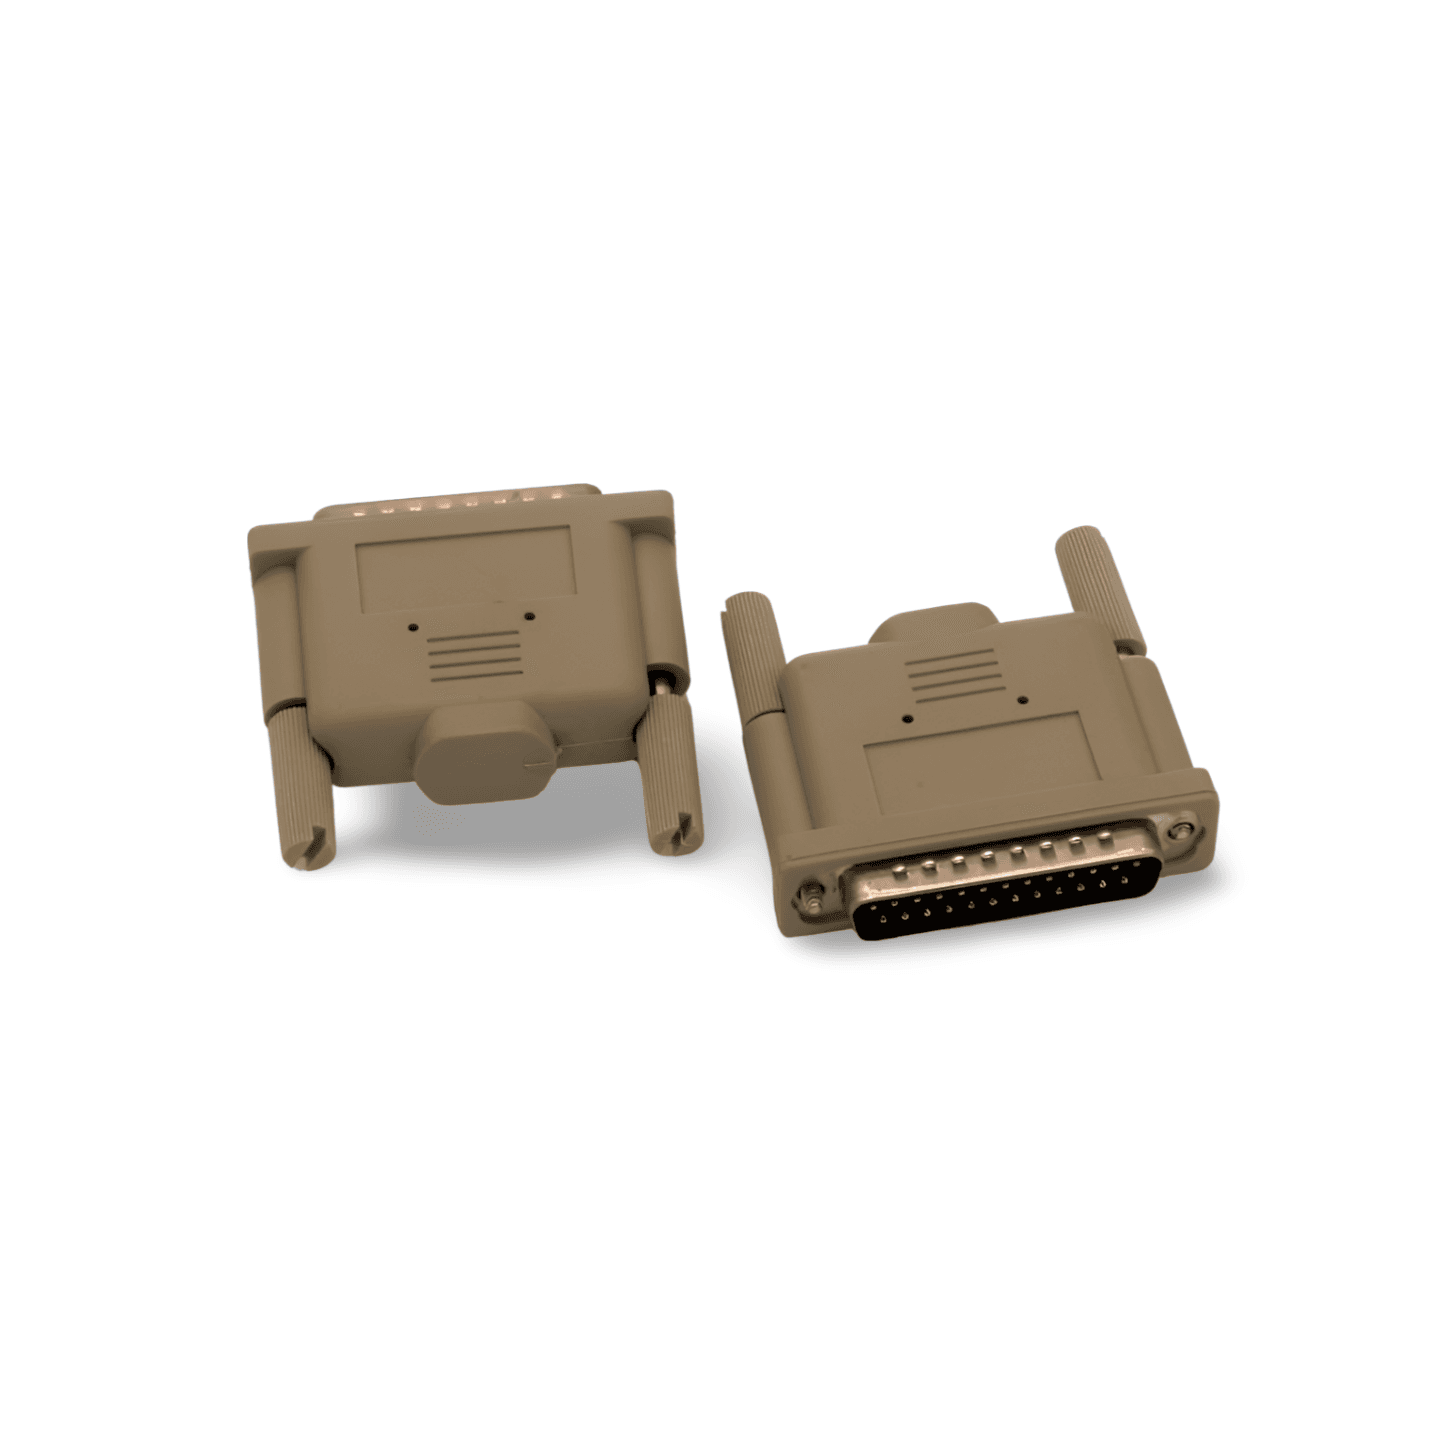 1in Parallel Loopback Tester Adapter Plug DB25 Male beige